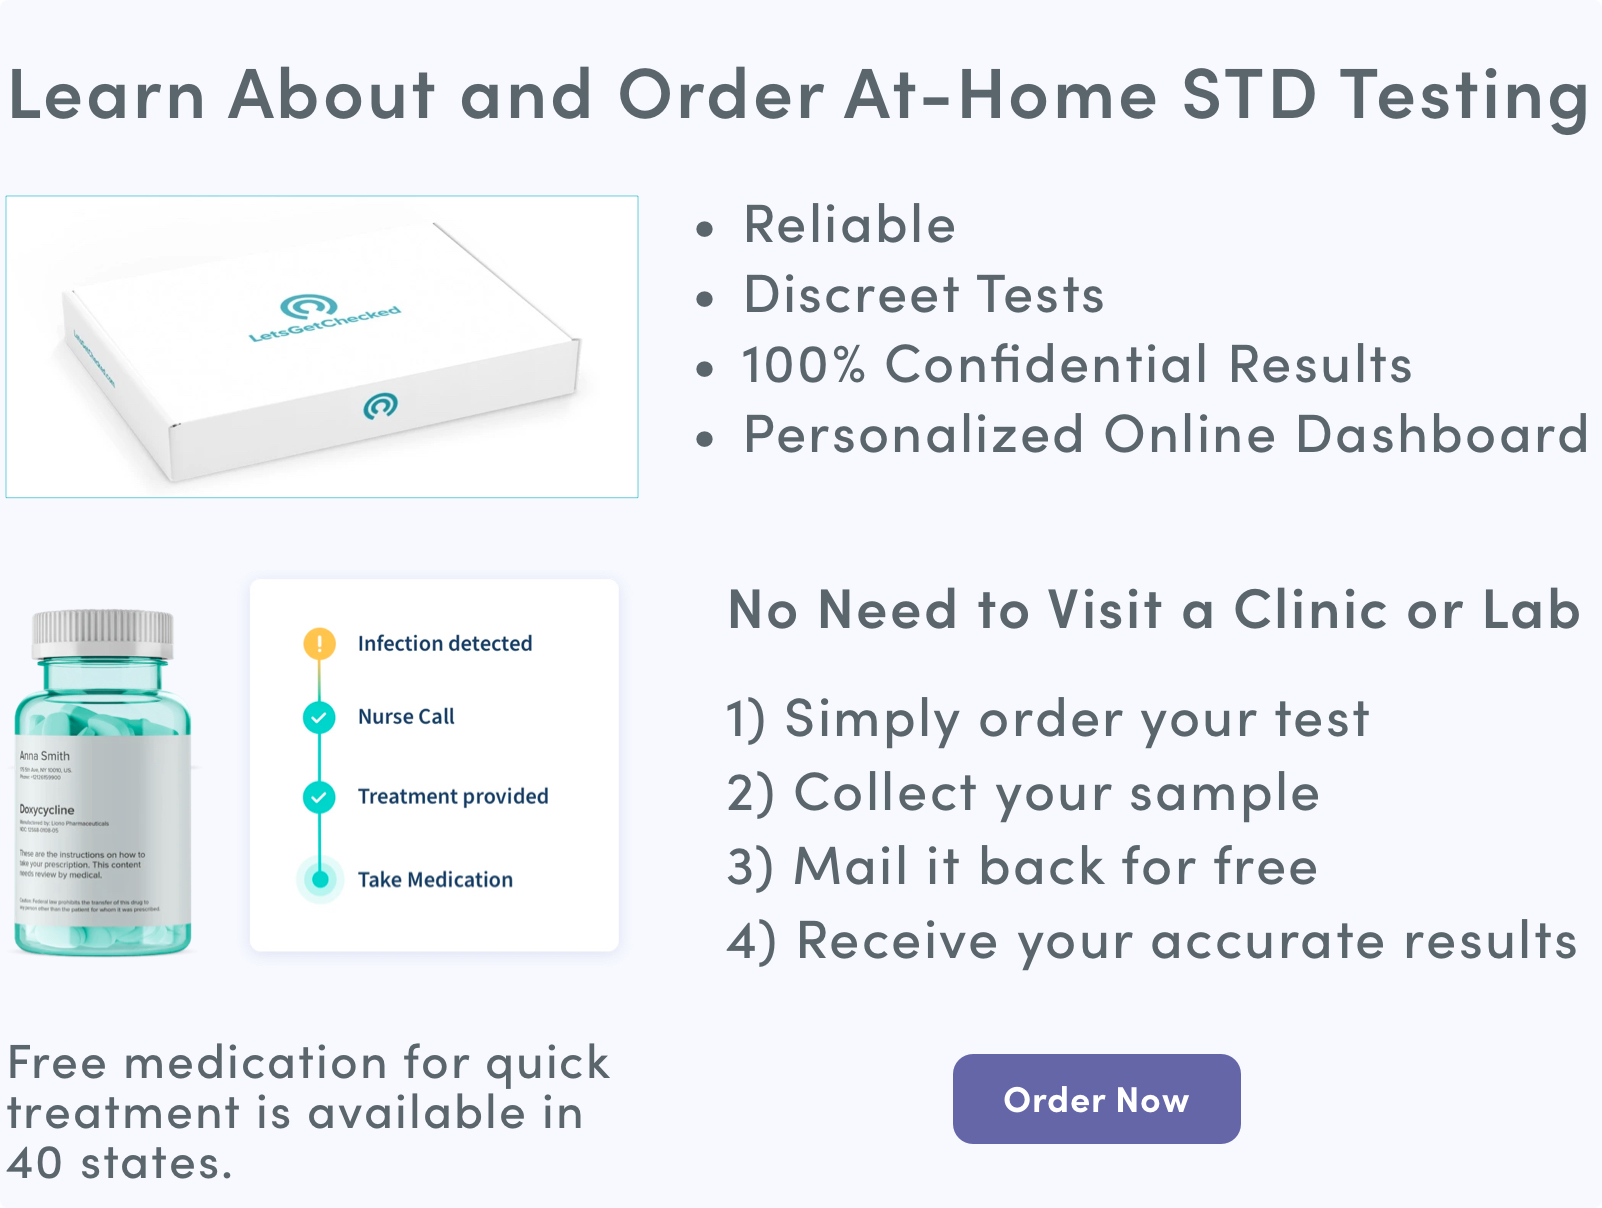 Learn About and Order At-Home STD Testing